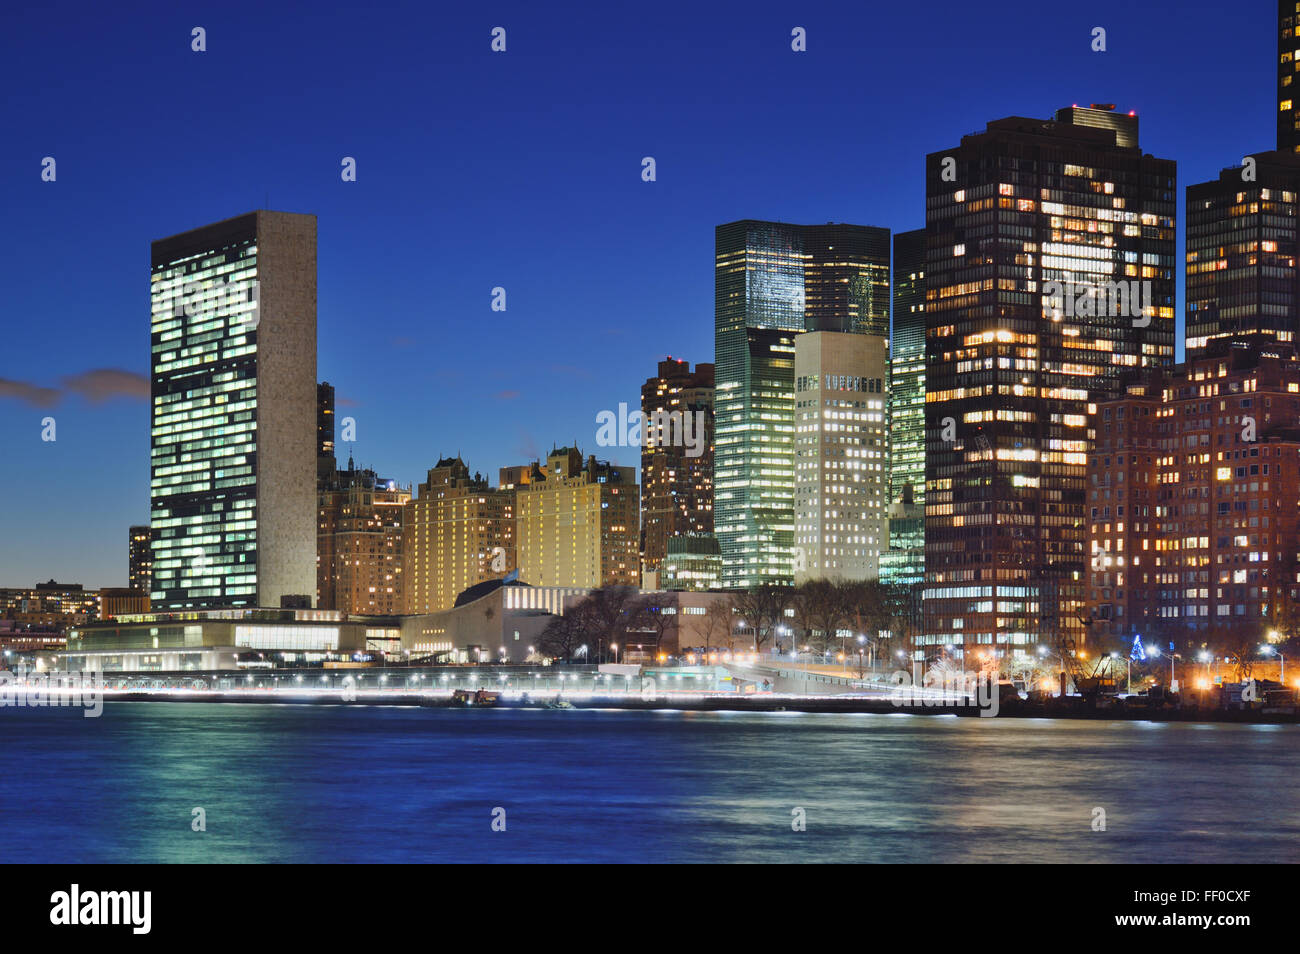 A night view of the New York City skyline from Roosevelt Island. Stock Photo